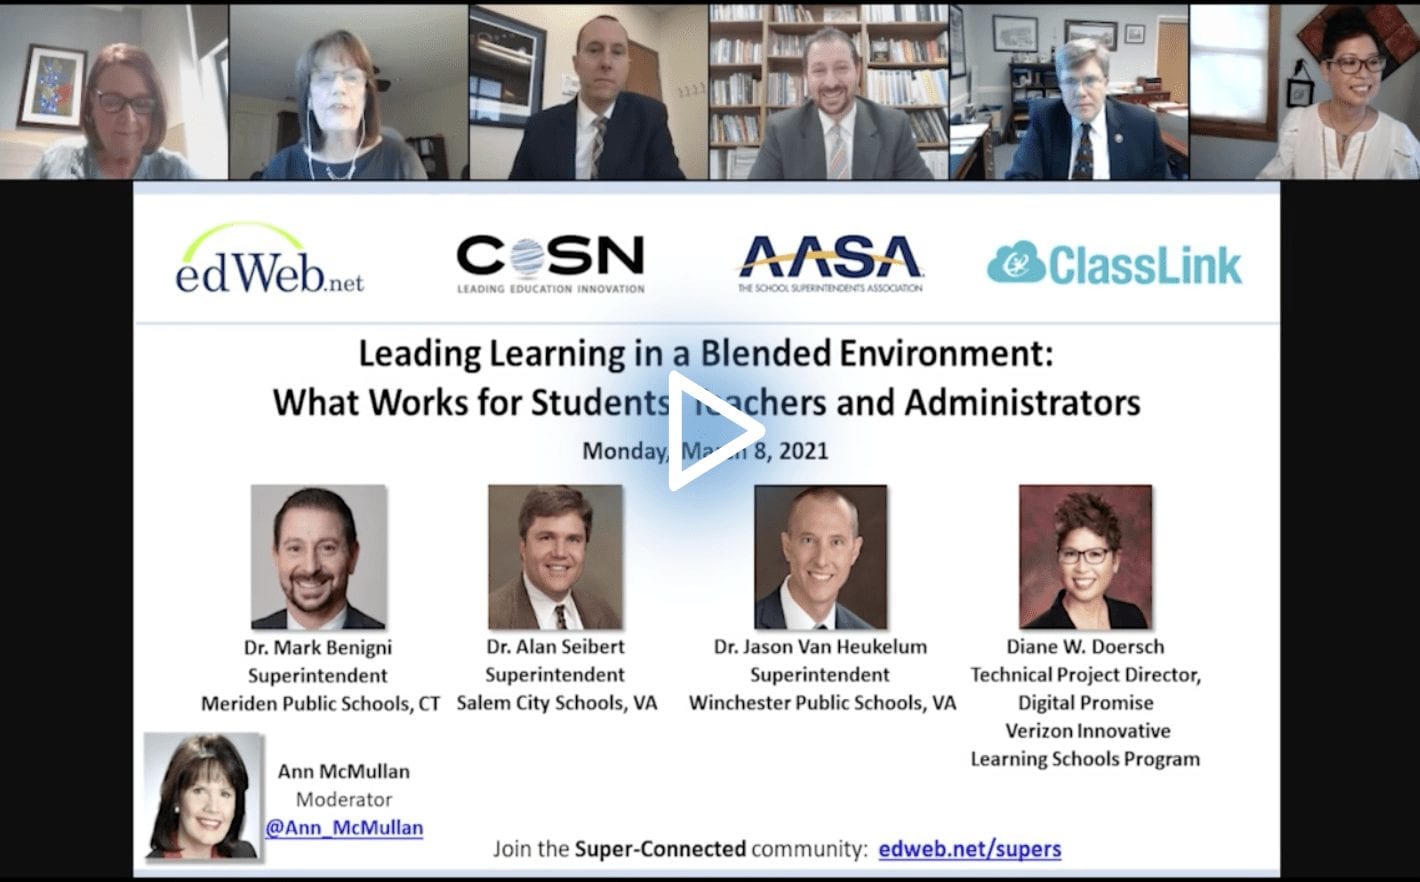 Leading Learning in a Blended Environment: What Works for Students, Teachers and Administrators edWebinar recording link